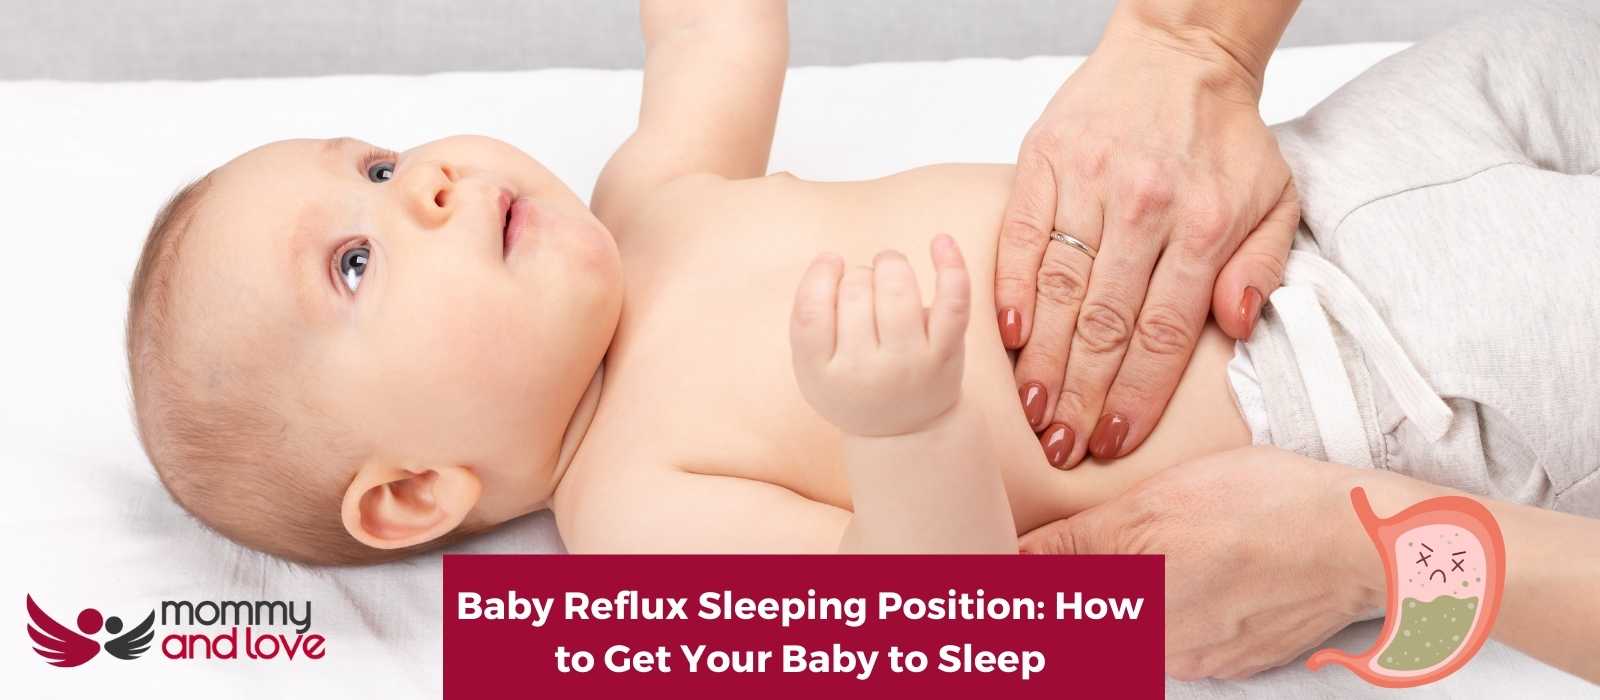 Baby Reflux Sleeping Position How to Get Your Baby to Sleep